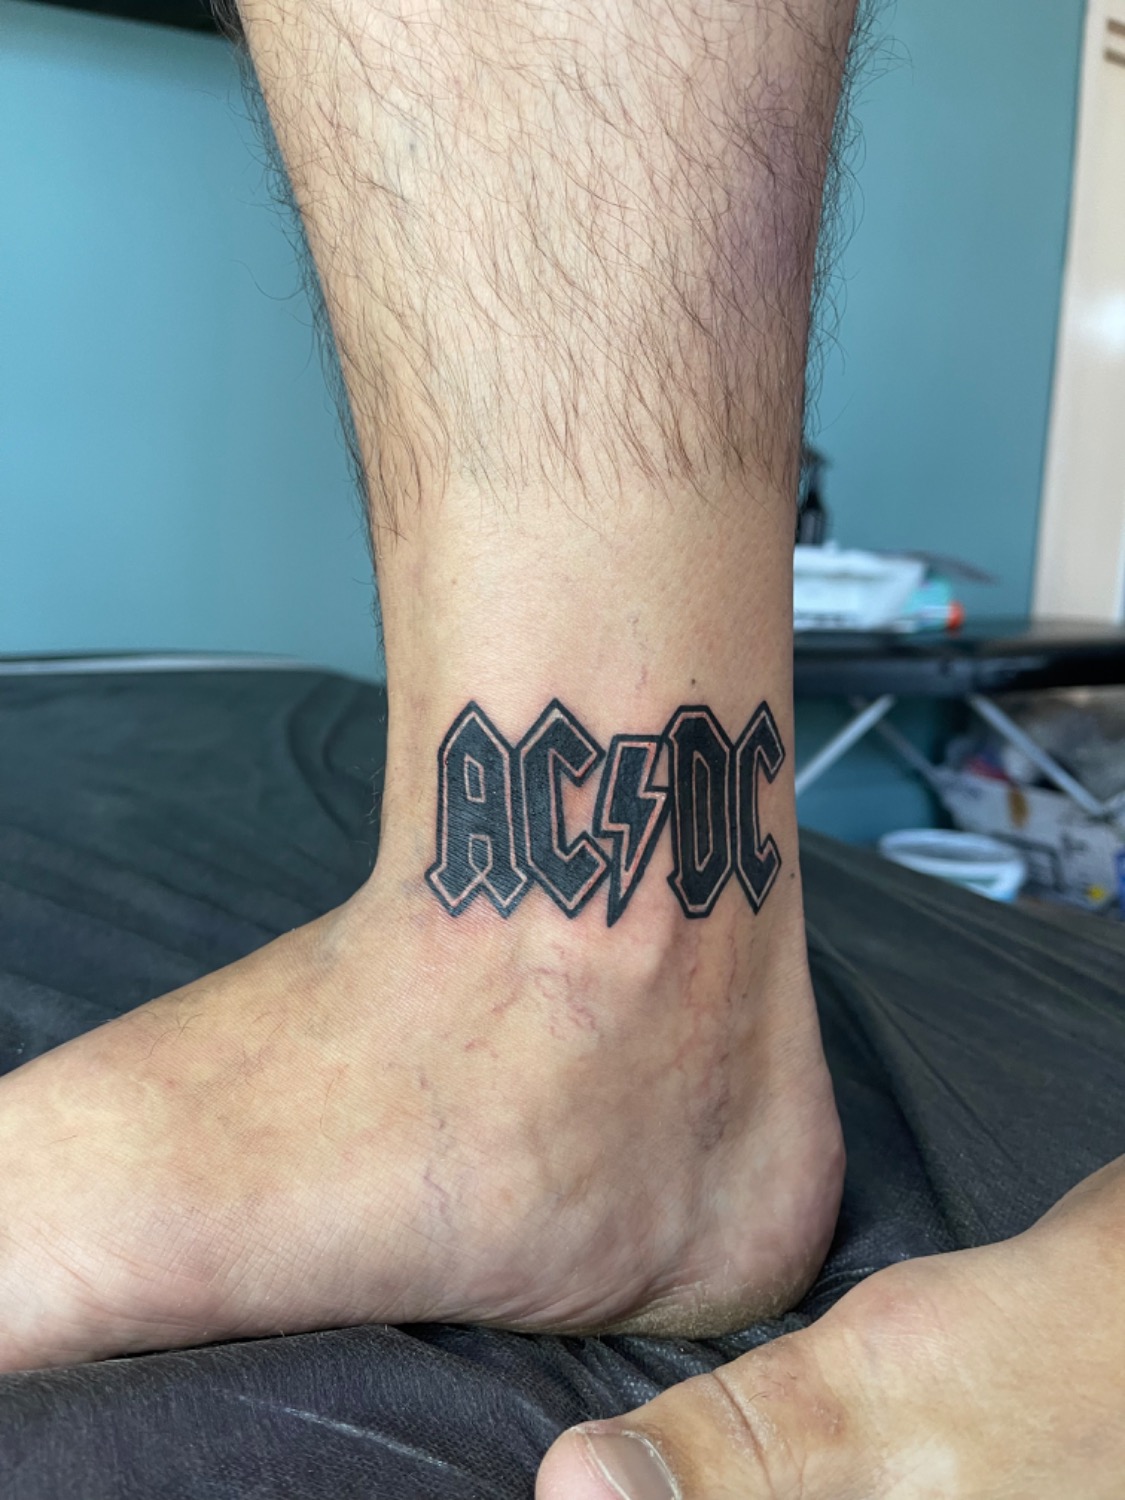 ACDC TATTOOS PHOTOS PICS PICTURES IMAGES